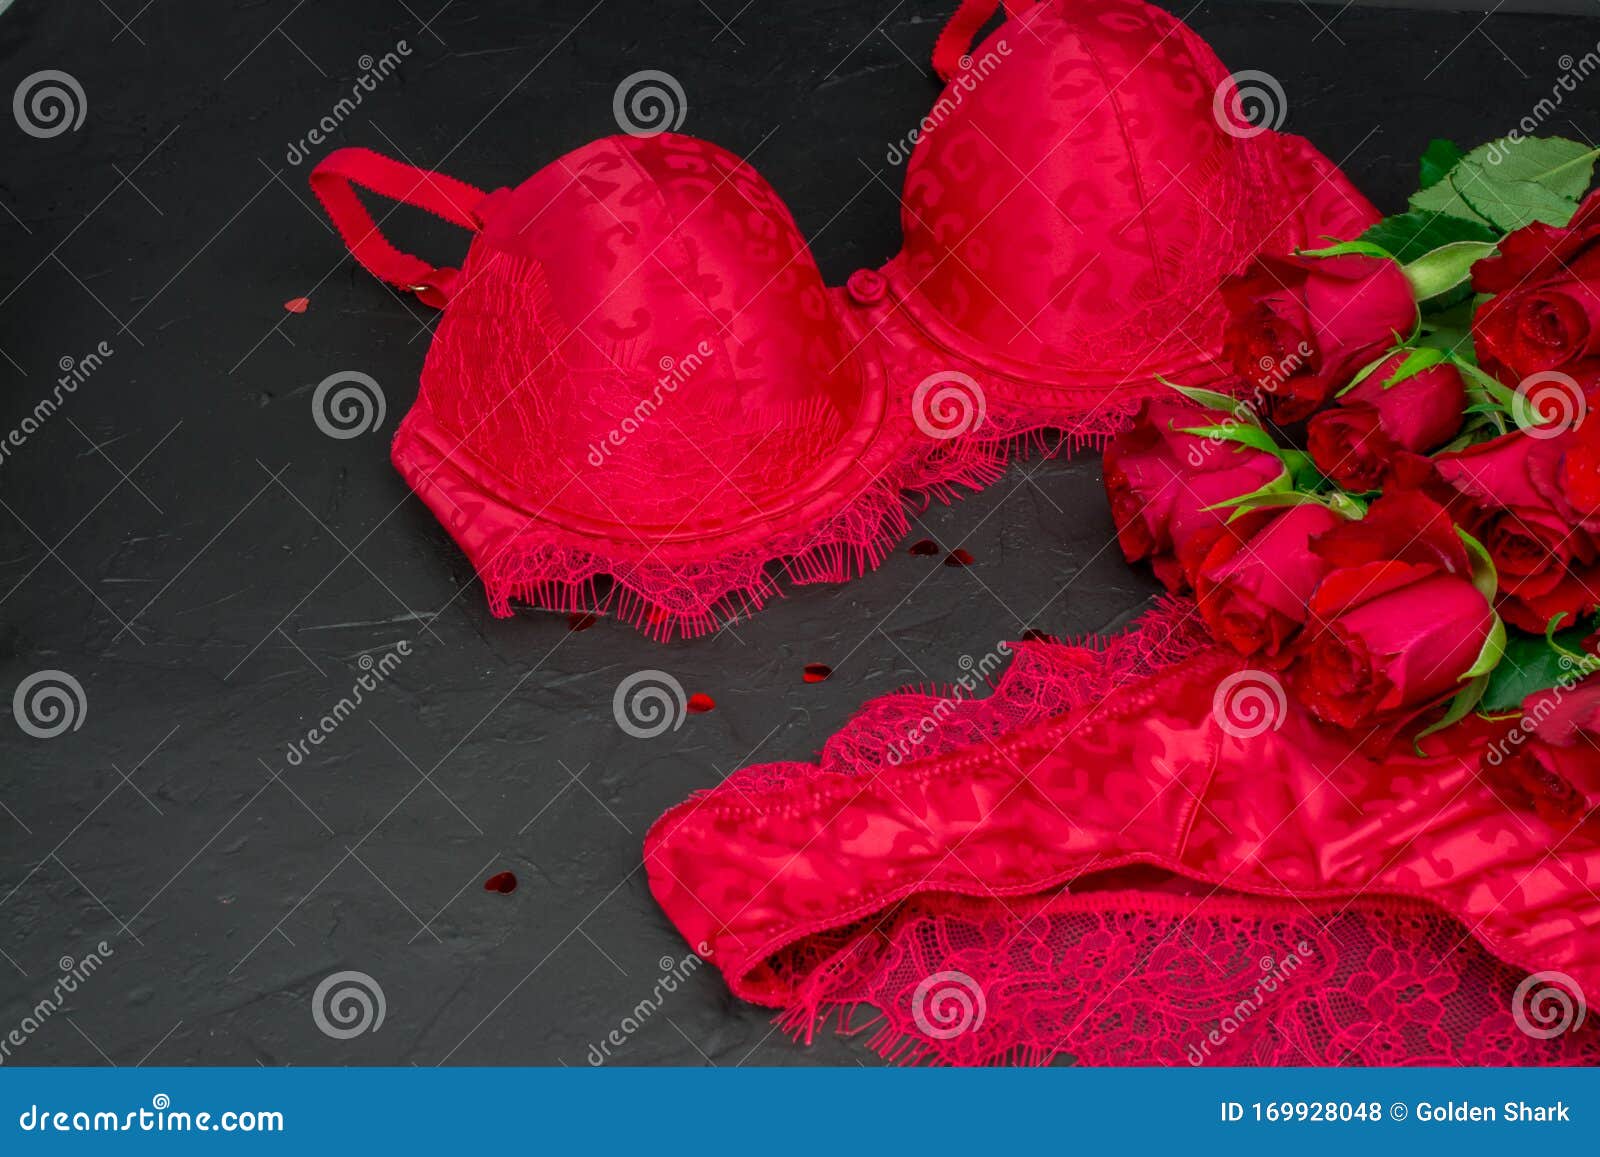 sexy black background with  knickers  bra and red roses